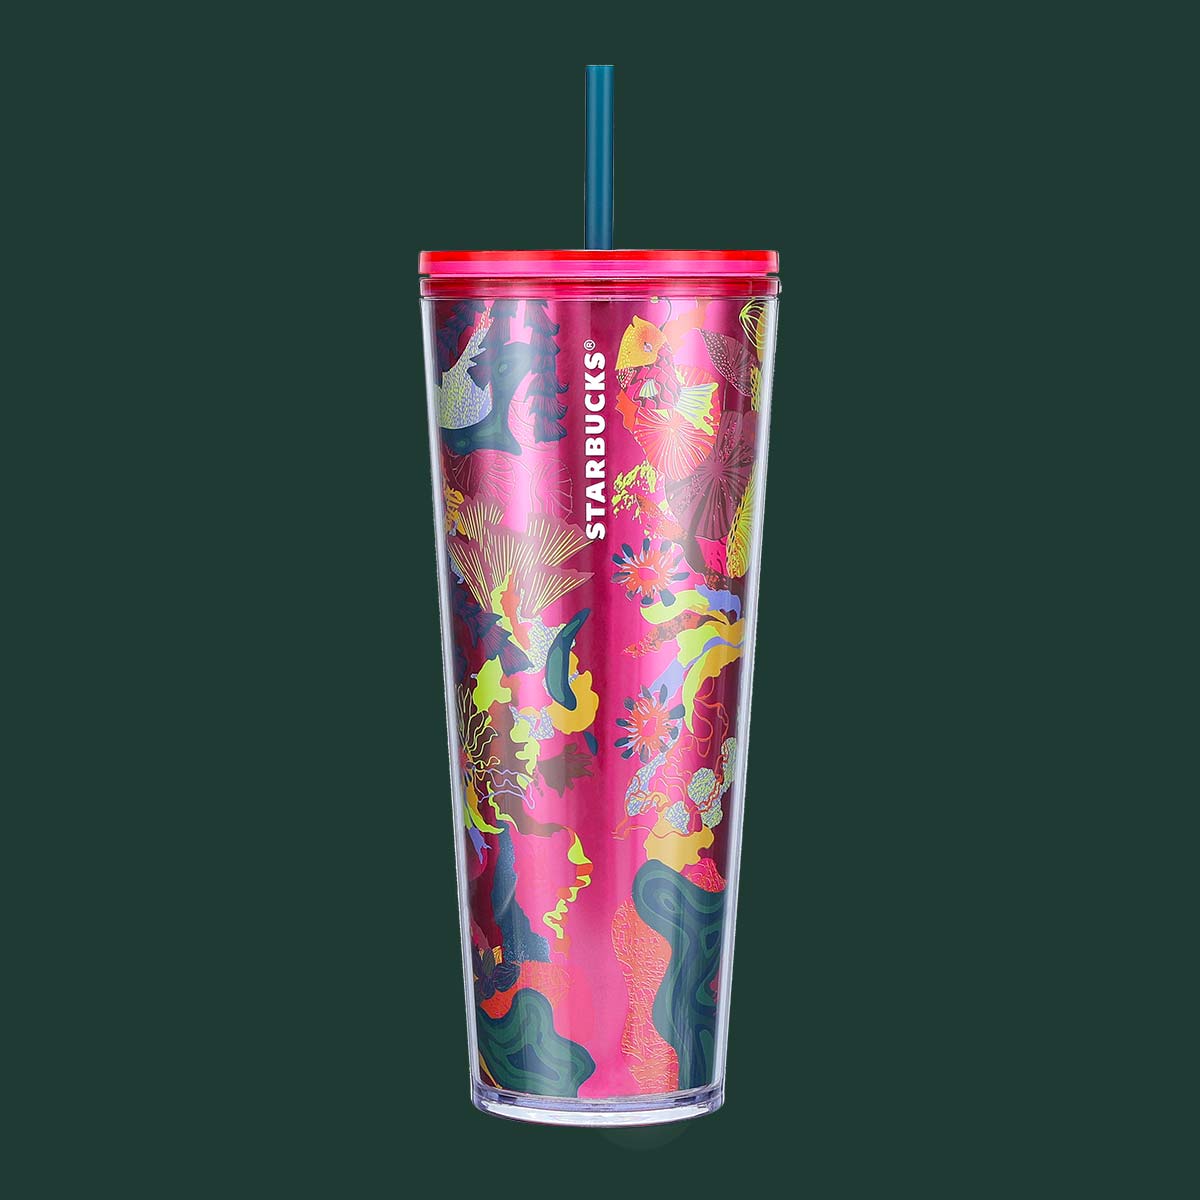 Starbucks Ocean & Forest Cold Cup.